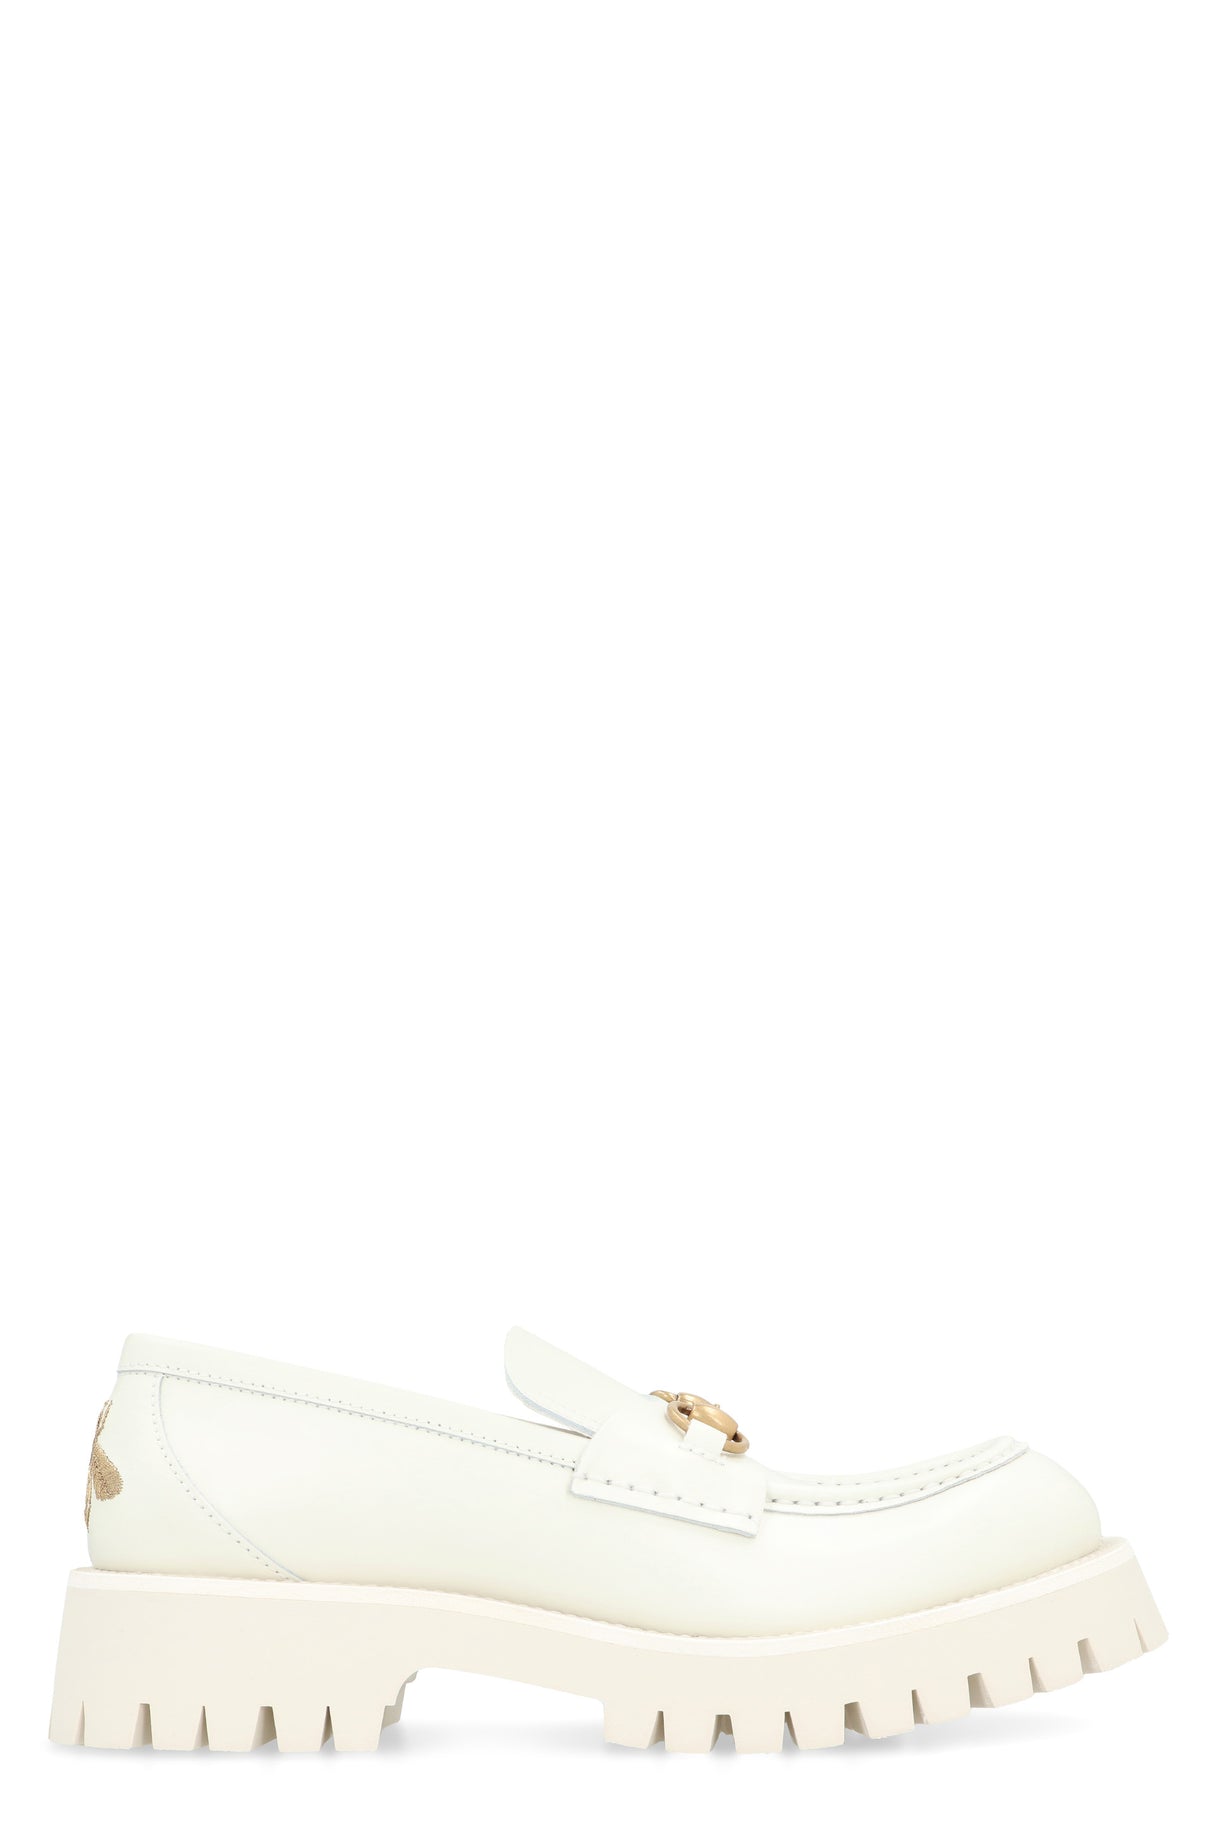 GUCCI White Horsebit Leather Loafers for Women - SS24 Collection